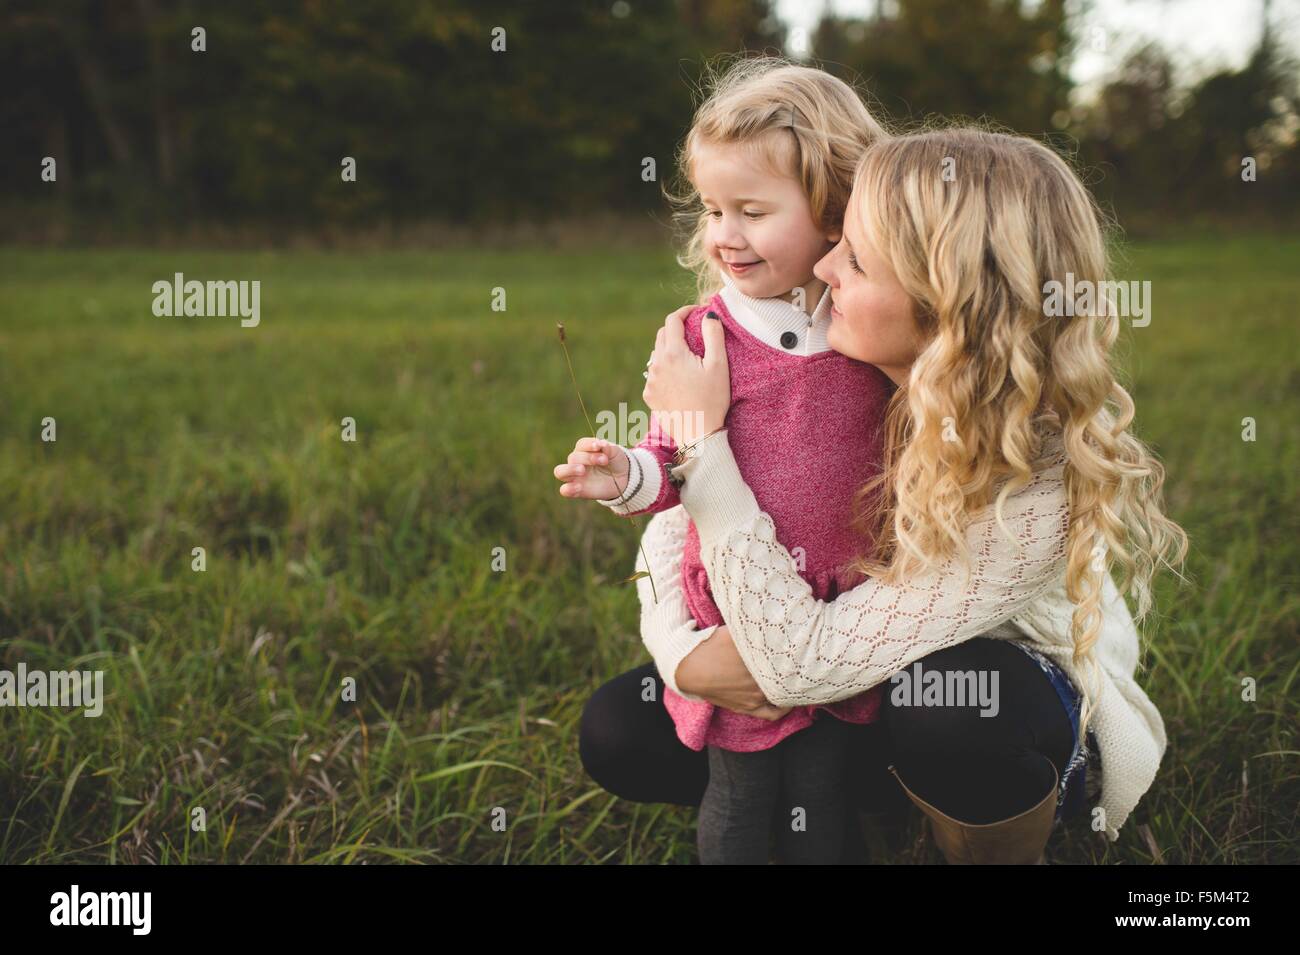 Mid adult woman and daughter holding stem of grass in field Stock Photo